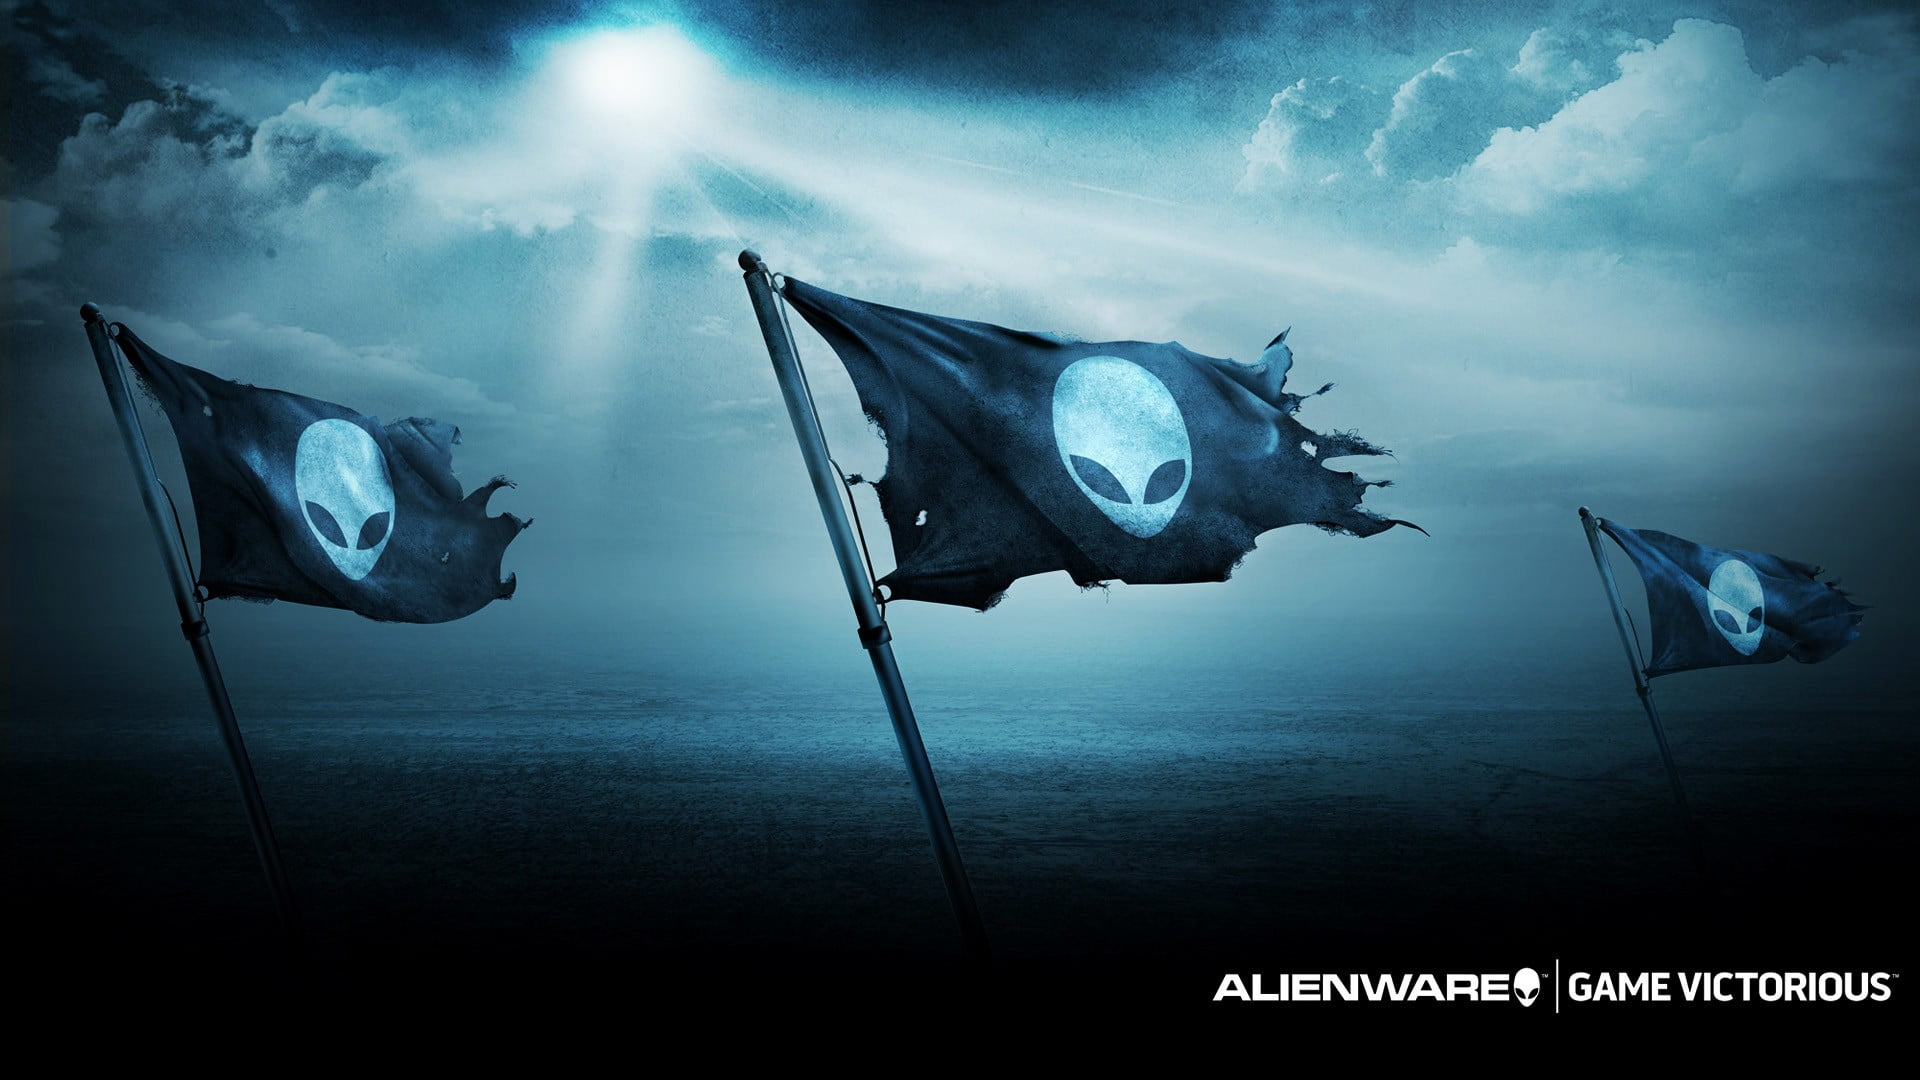 Alienware Flags Alienware Computer Pc Gaming Flag Hd Wallpaper Wallpaper Flare Tommyinnit dream team dream smp technoblade wilbur soot tubbo. alienware flags alienware computer